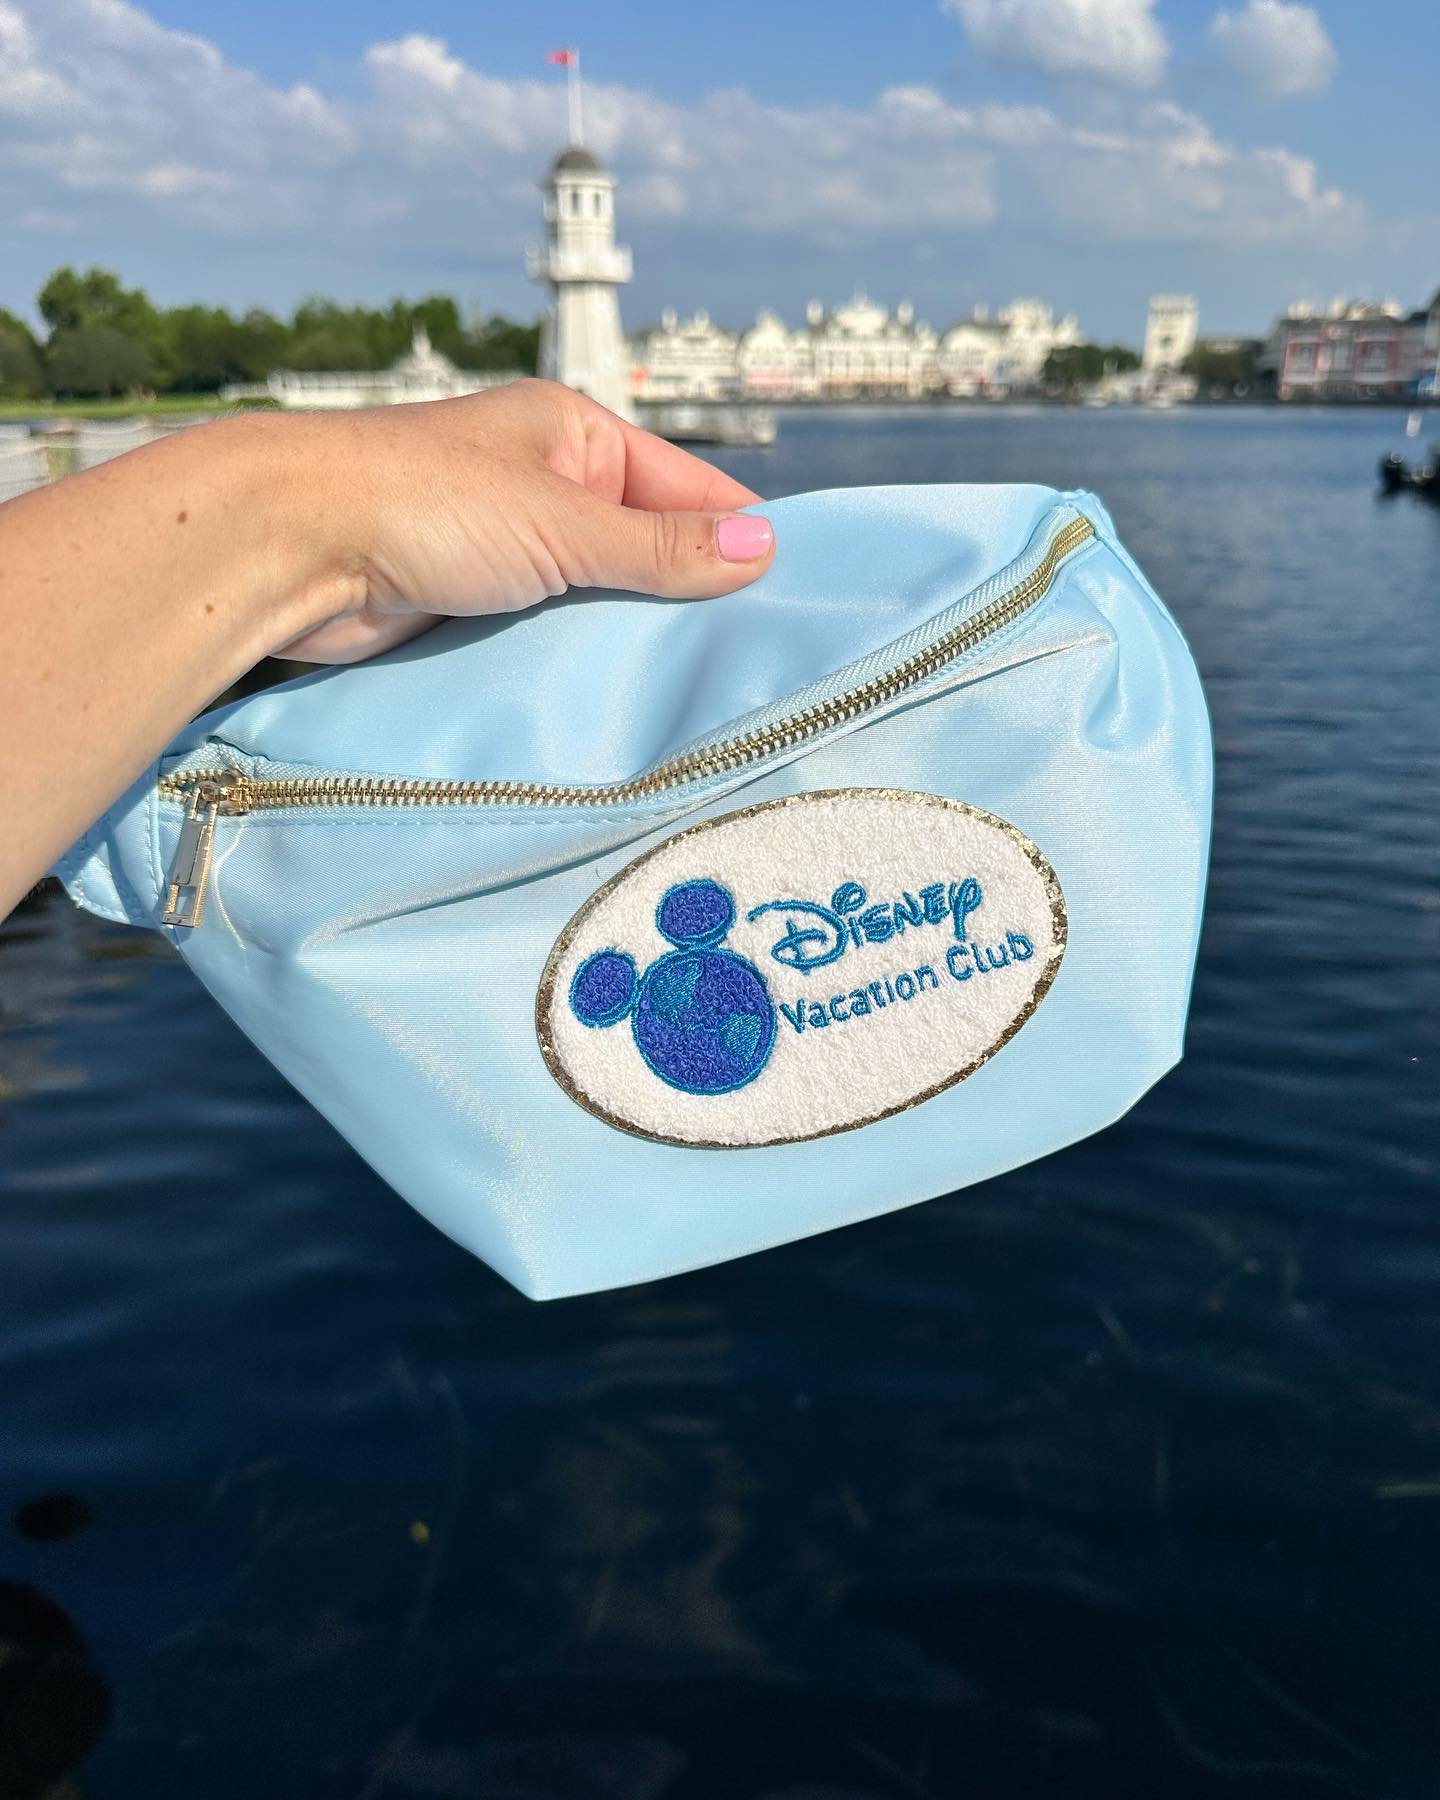 ✨✨ New Disney resort collection is here! Shop new patches, fanny packs and pouches. This has been a best selling collection for a while now but I just added 5 new designs. Shop now! ✨✨